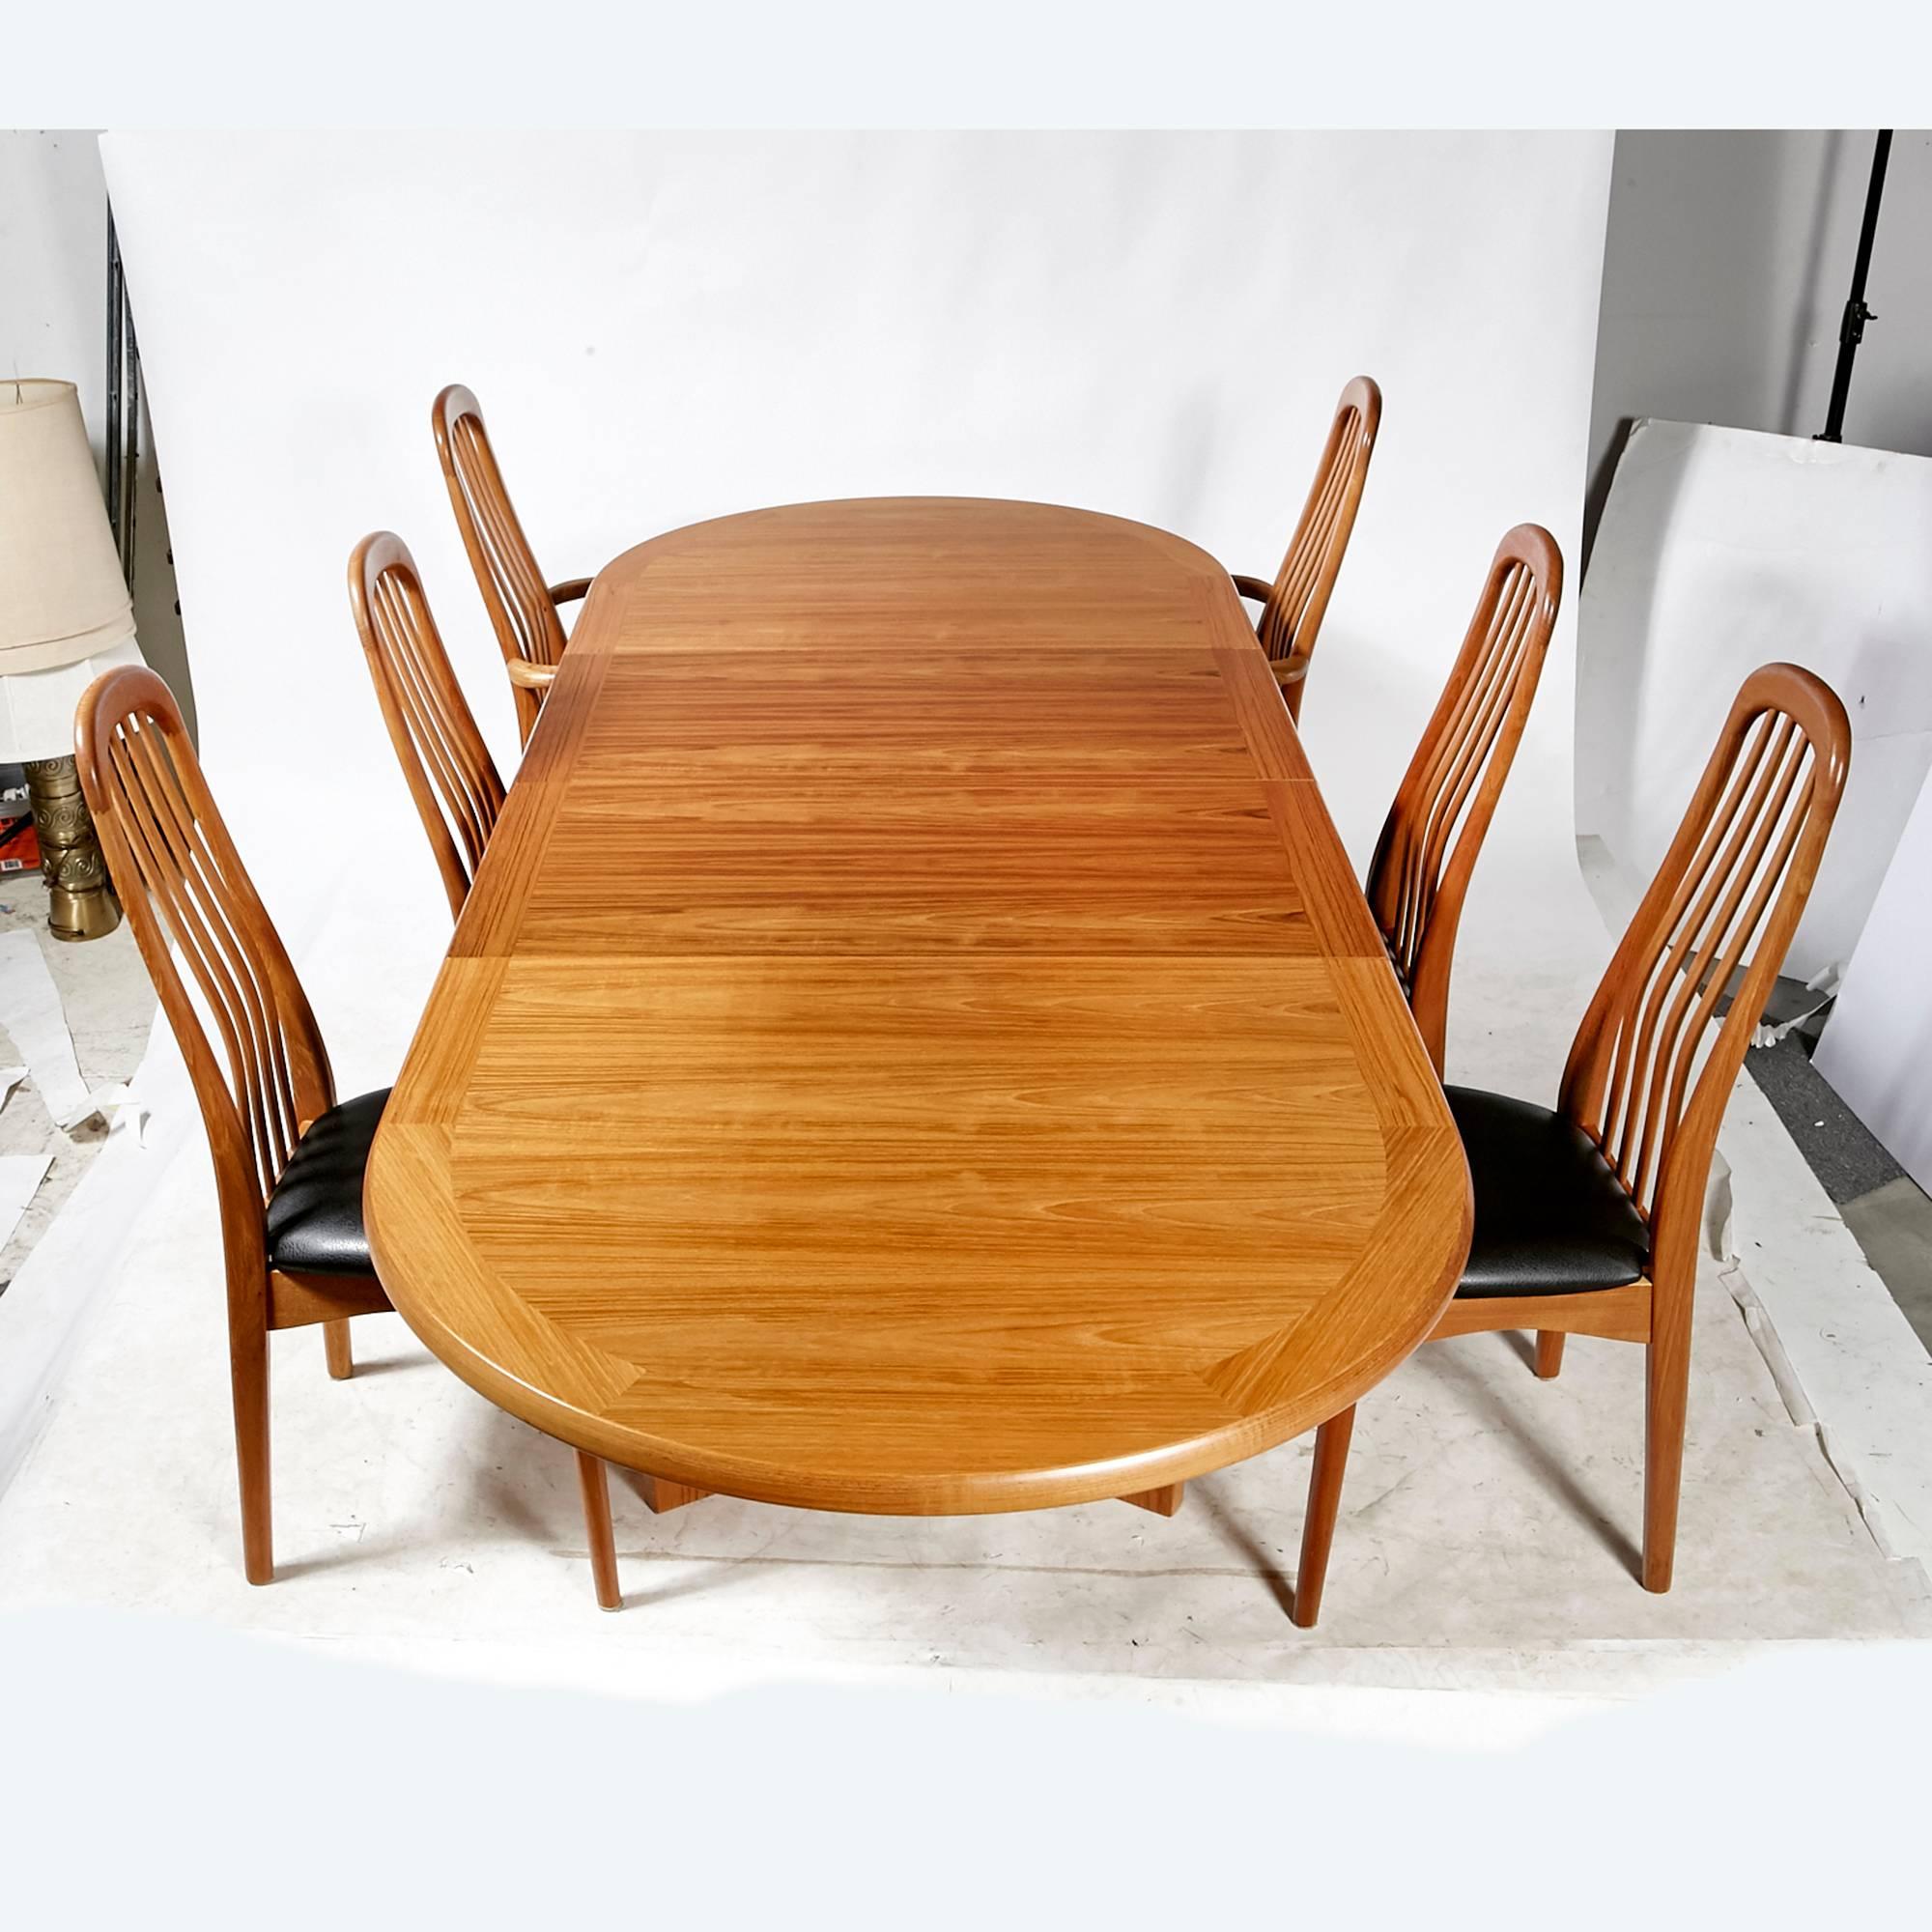 Vintage mid-20th century Scandinavian style Benny Linden teak dining room set with six chairs and the matching table. There are two-armed chairs and new black Naugahyde seats on all the chairs. Marked.
Measurements: Armchairs, 19in. D x 20in. W x